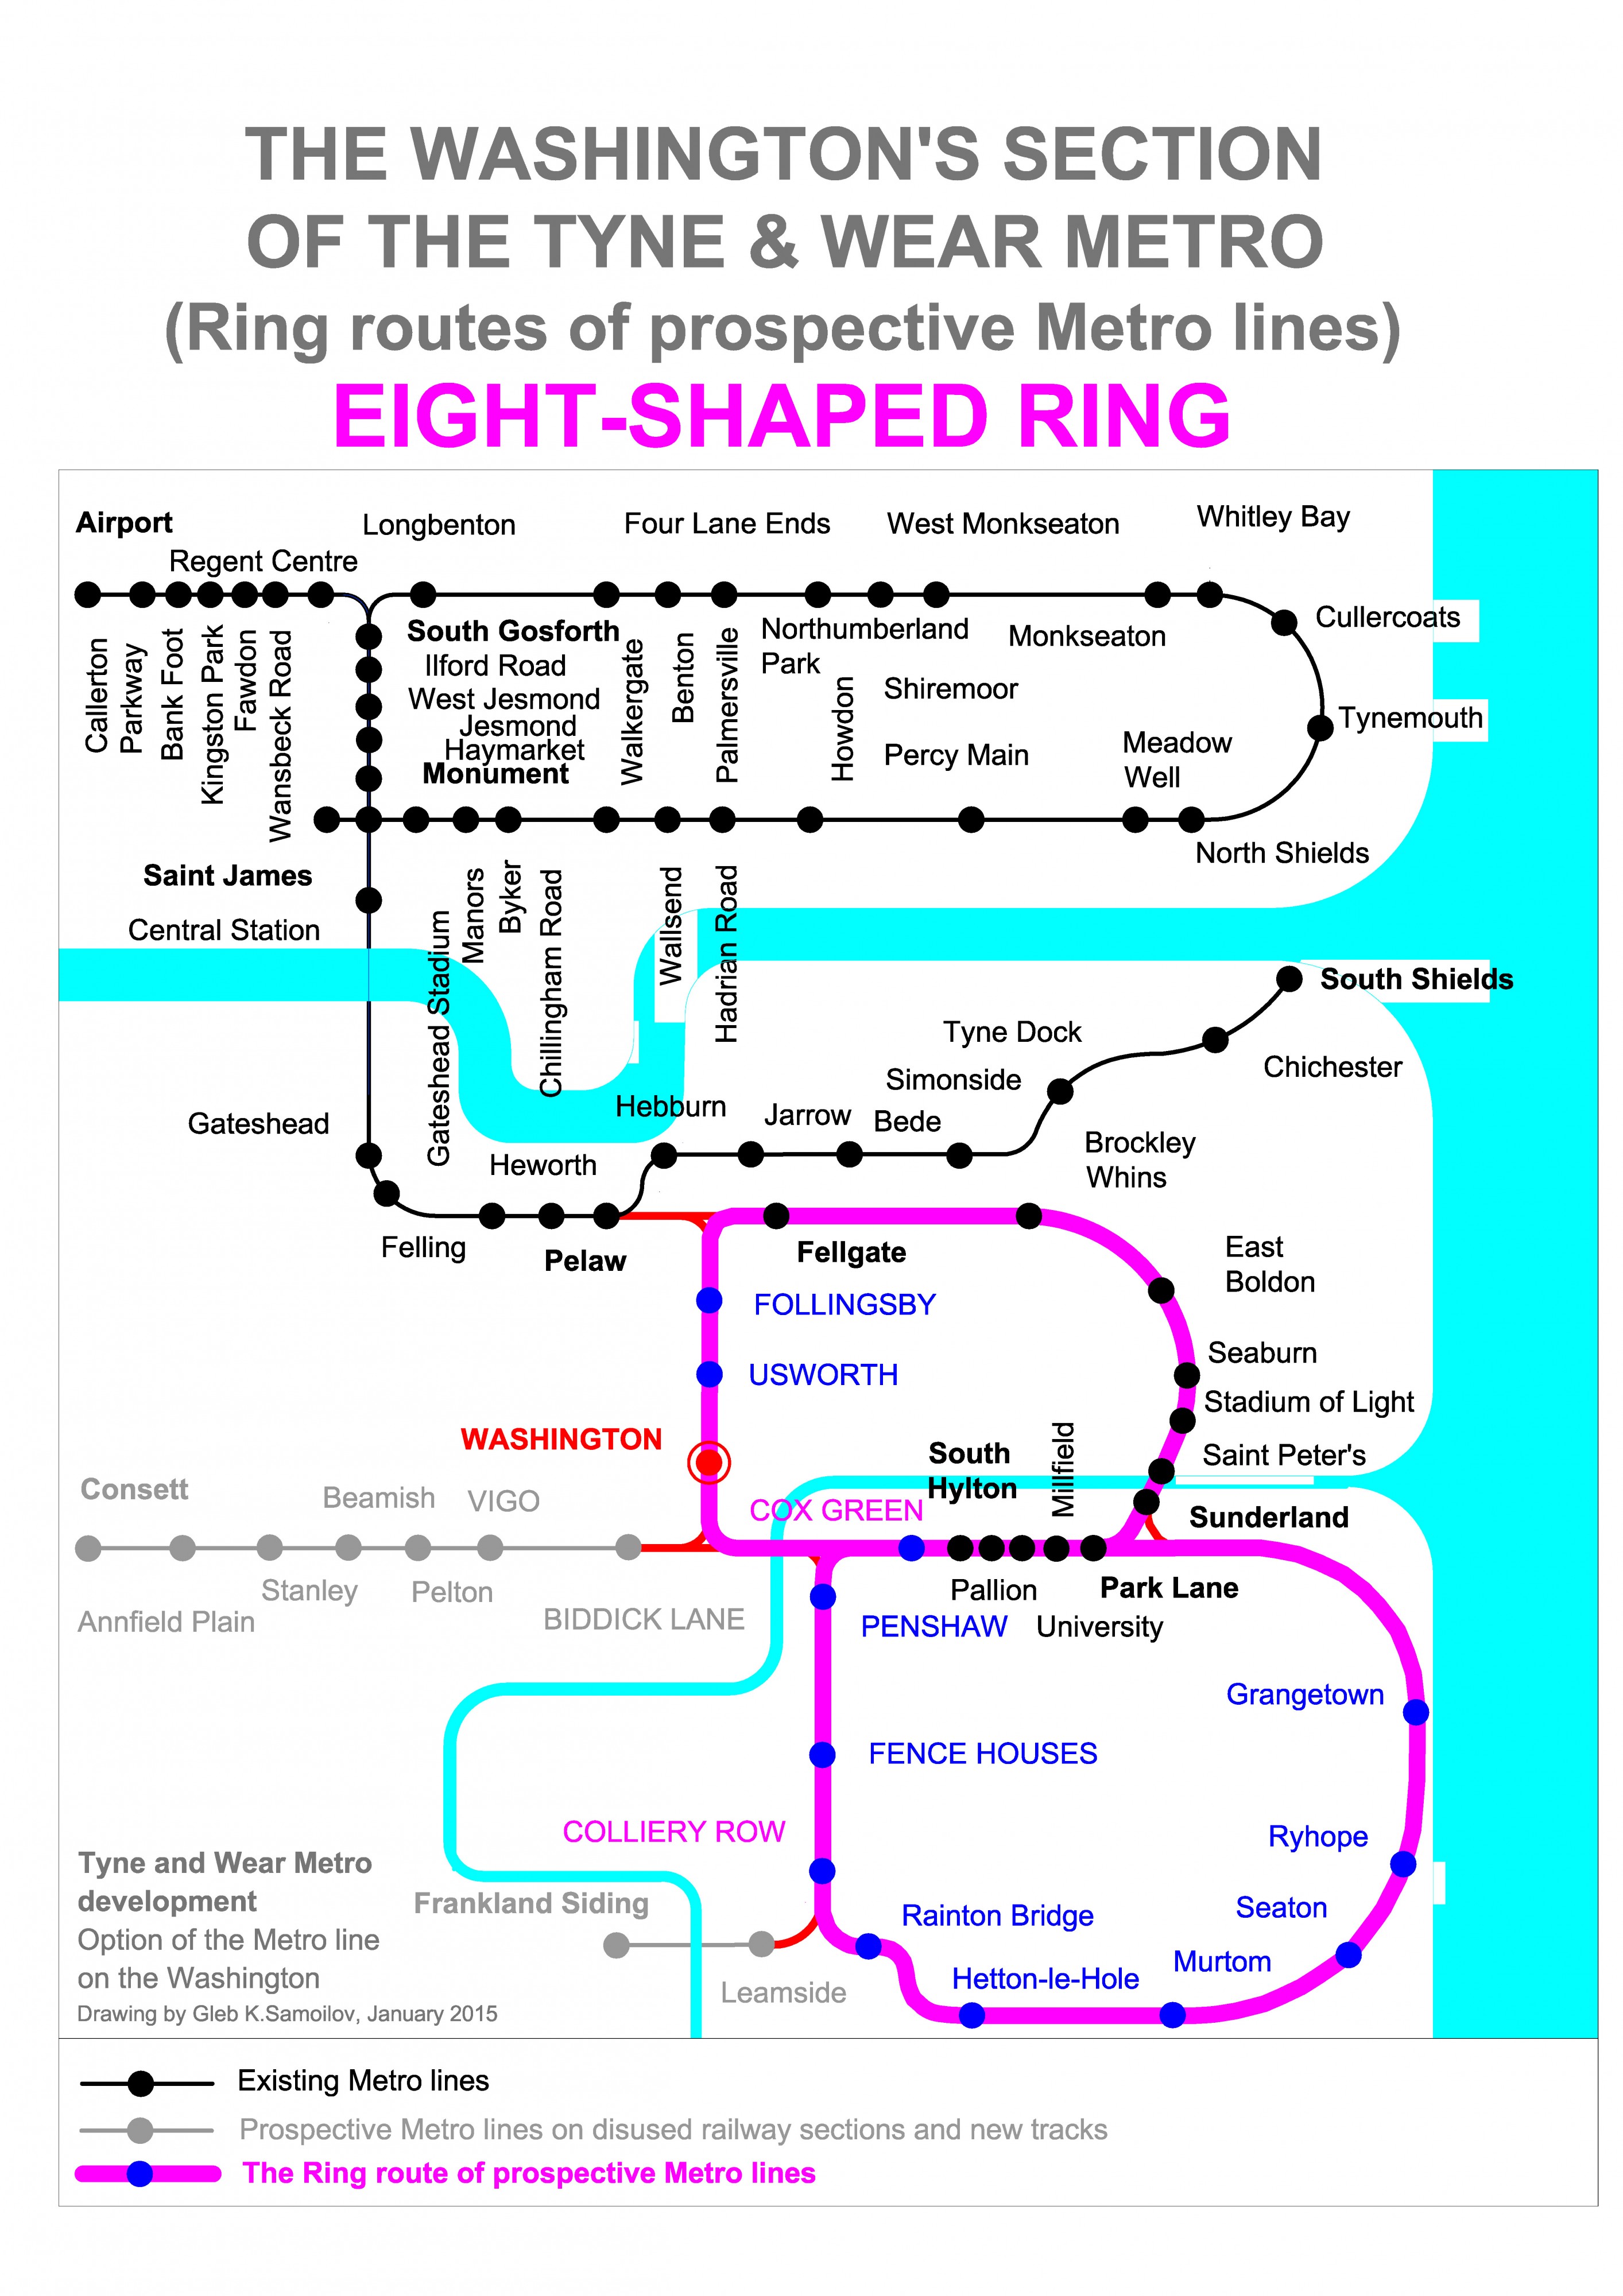 THE EIGHT-SHAPED RING – Night Ring route of prospective Tyne and Wear Metro lines at the Washington’s section